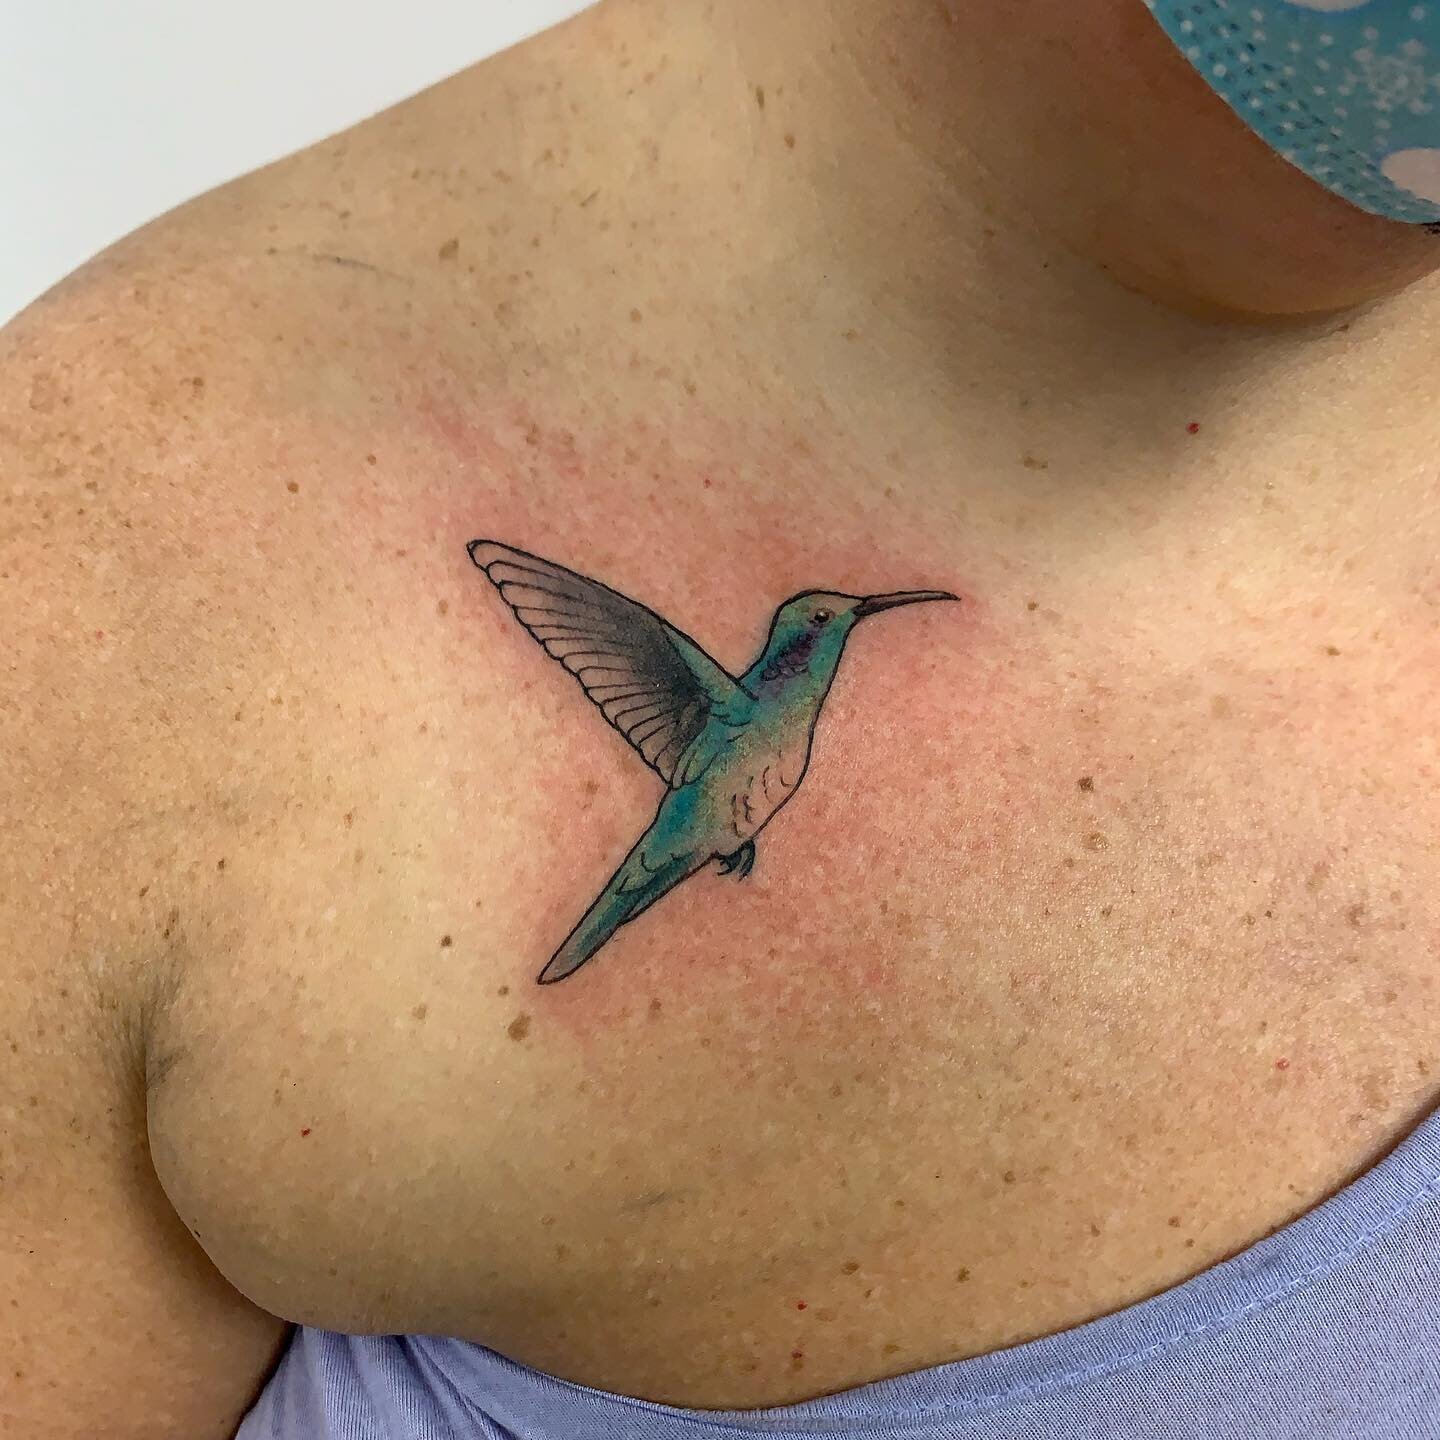 Mother and daughter hummingbirds from the other day #massachusetts #westernmasstattoo #Connecticut #connecticuttattoo #southwindsor #angrypenciltattoo #tattoo #tattoos #eternalink #hivecaps #saniderm #helios #dragonsbloodbutter #MAtattoo #CTtattoo #C